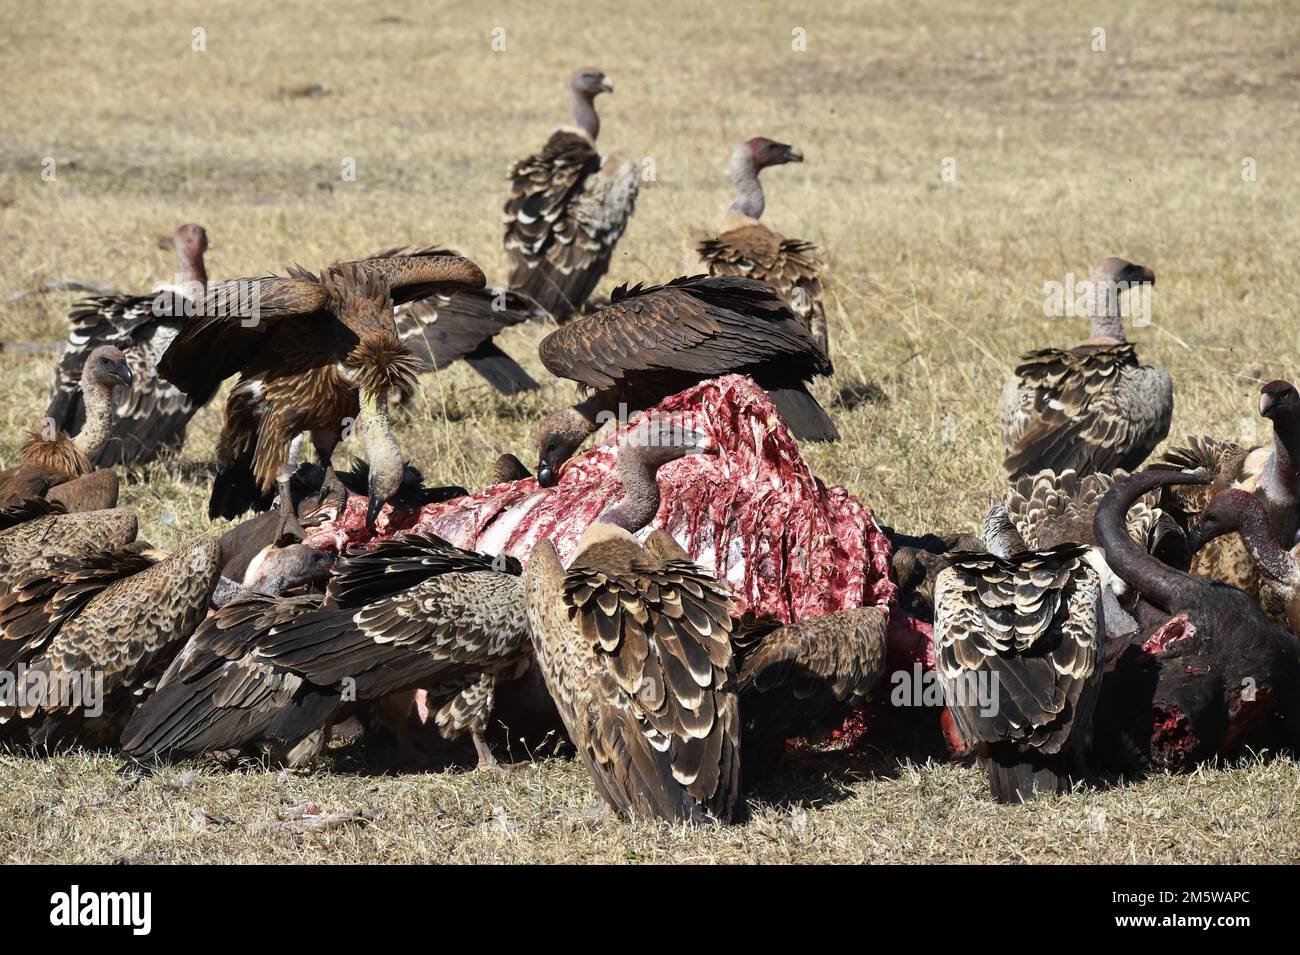 Vultures eating scraps from a water buffalo inAfrica, Kenya Stock Photo